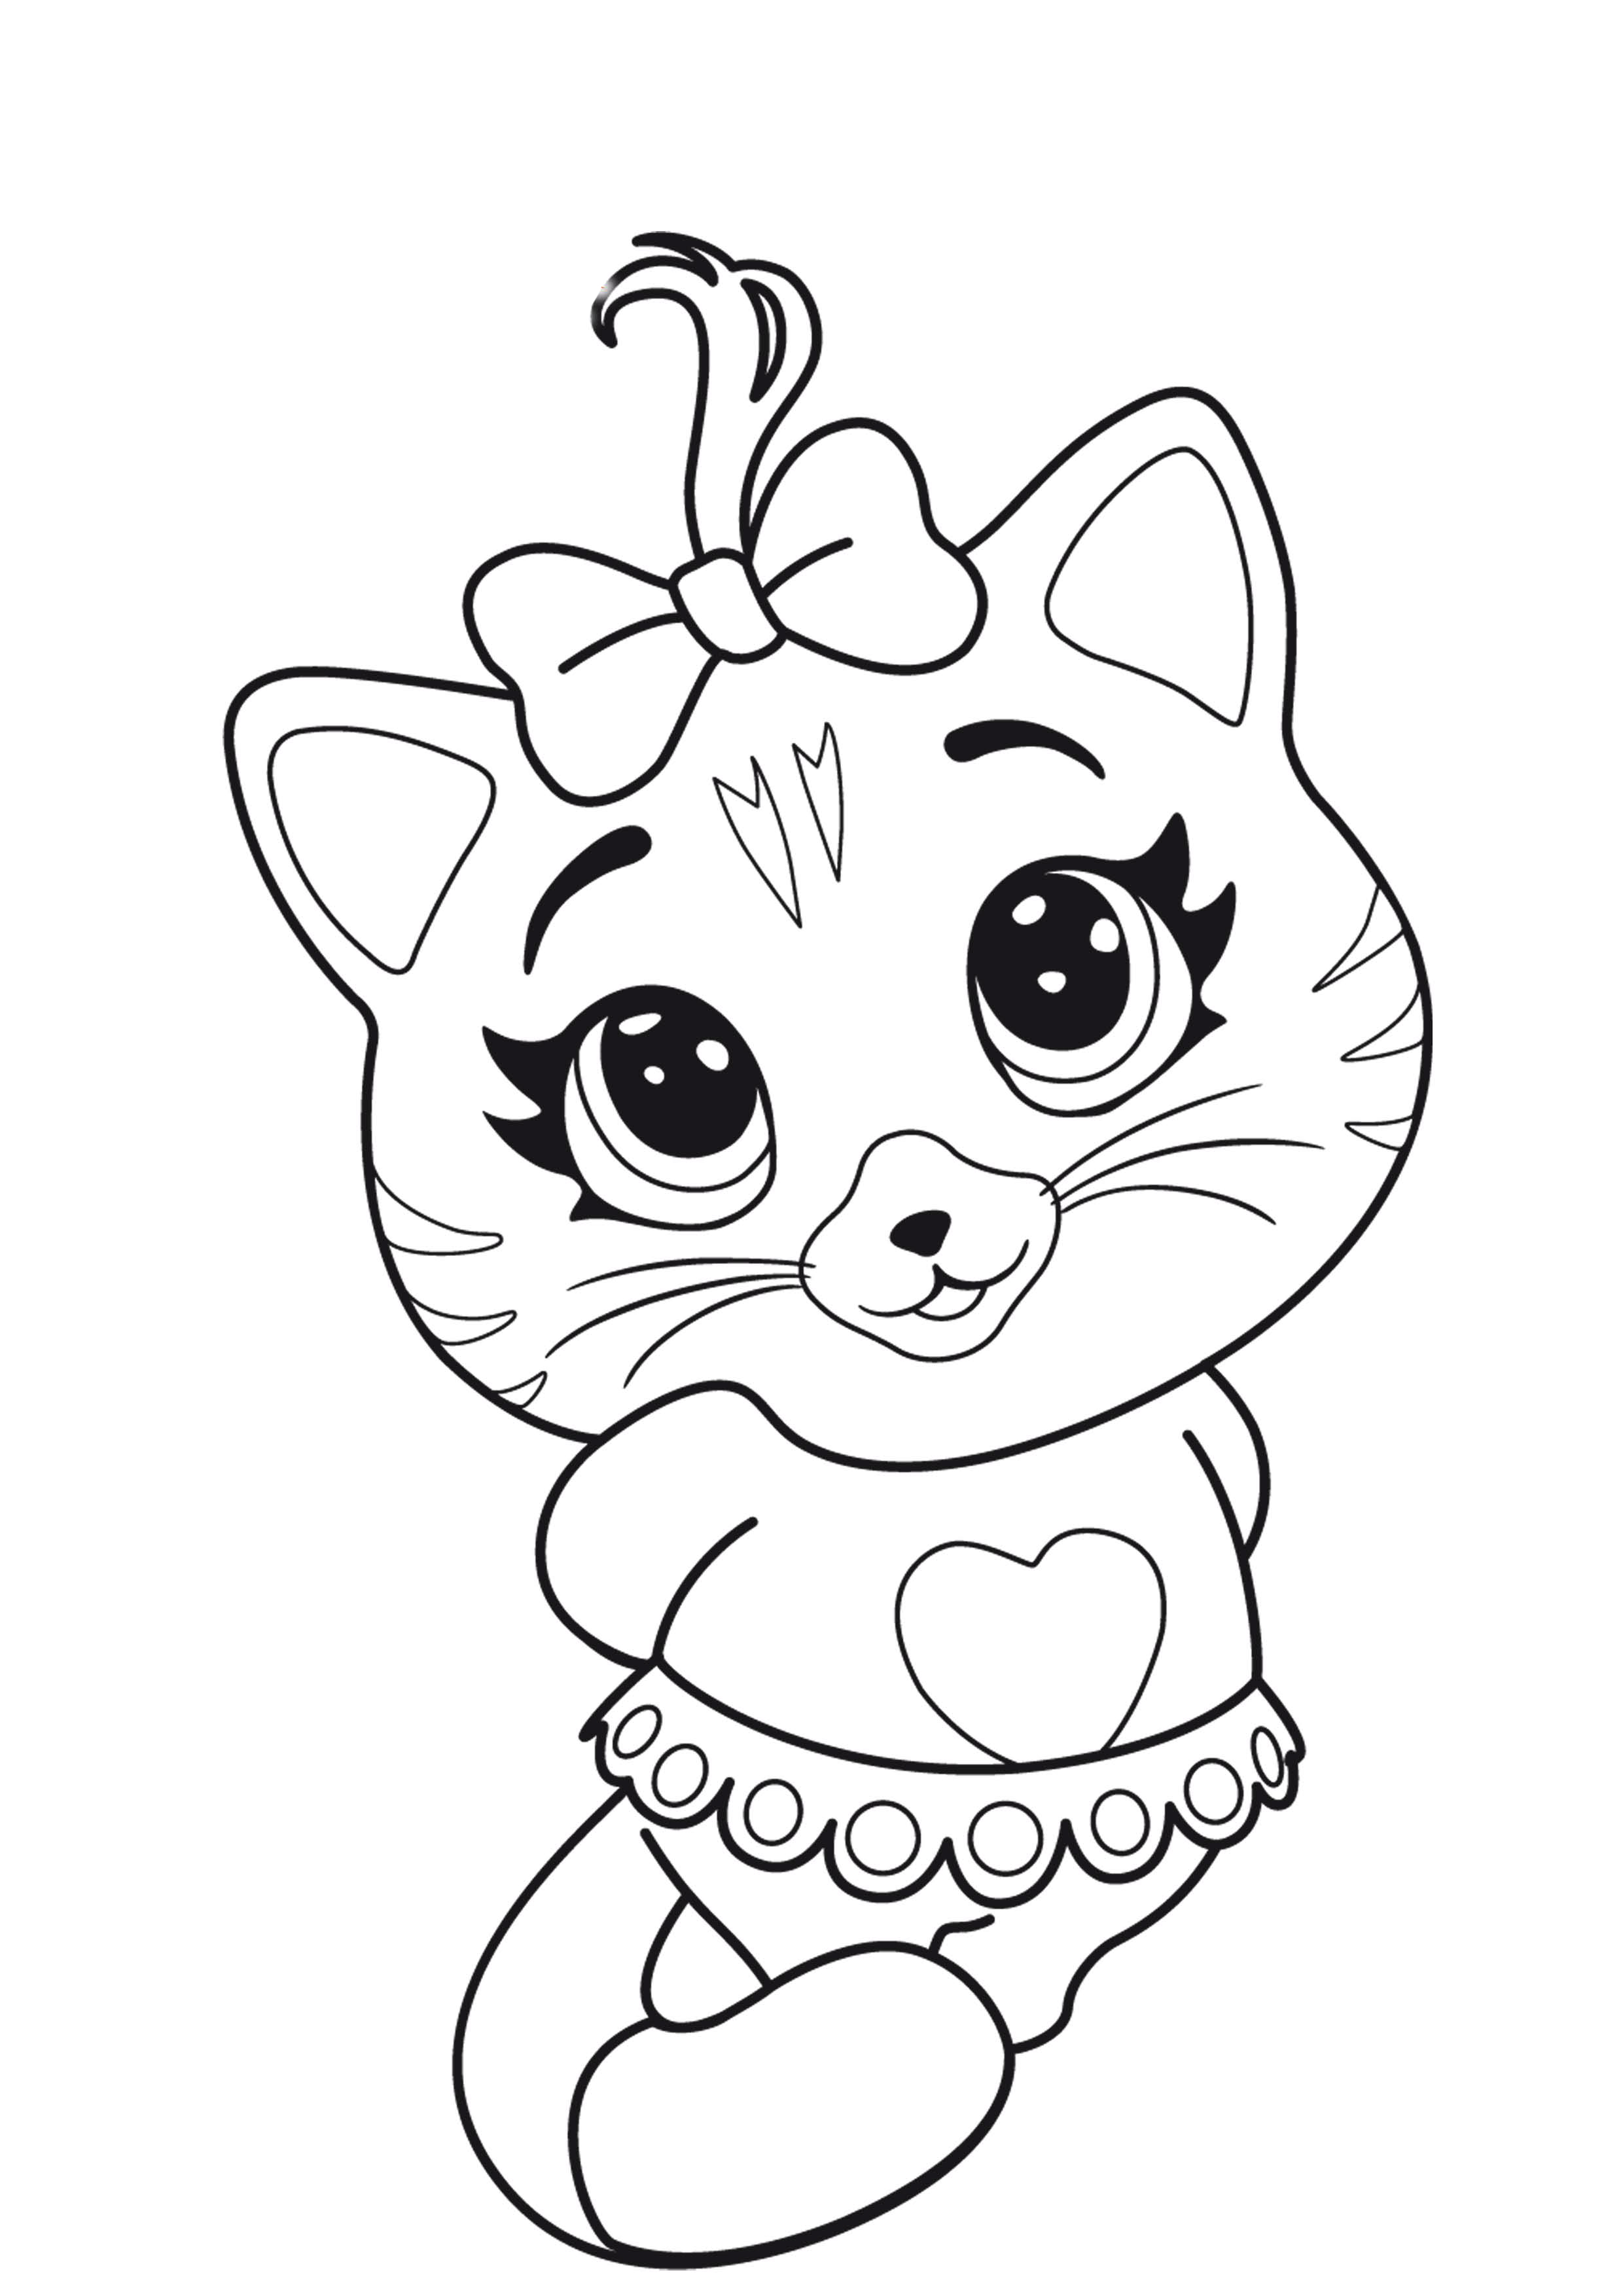 free-44-cats-coloring-pages-youloveit